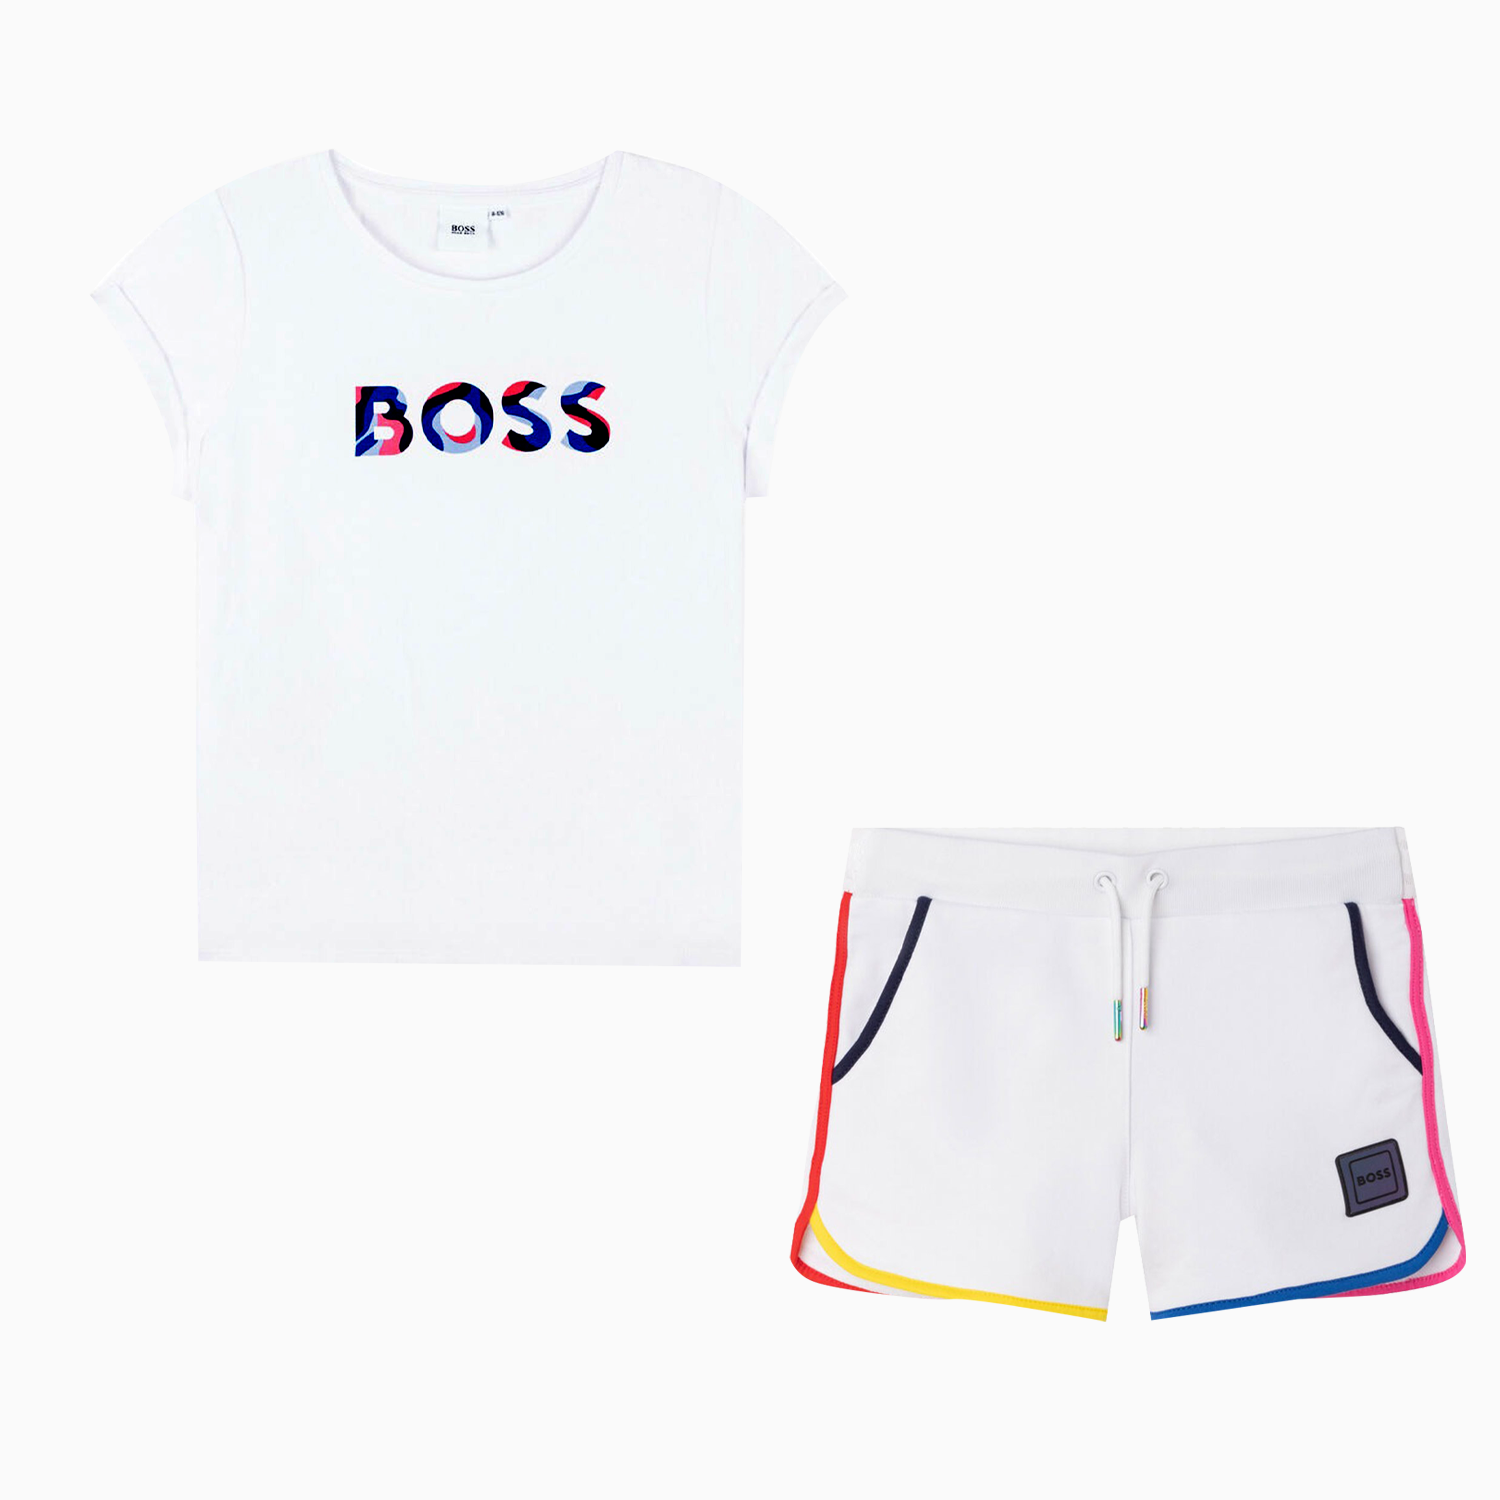 hugo-boss-kids-french-terry-outfit-toddlers-j15442-868-j14234-868